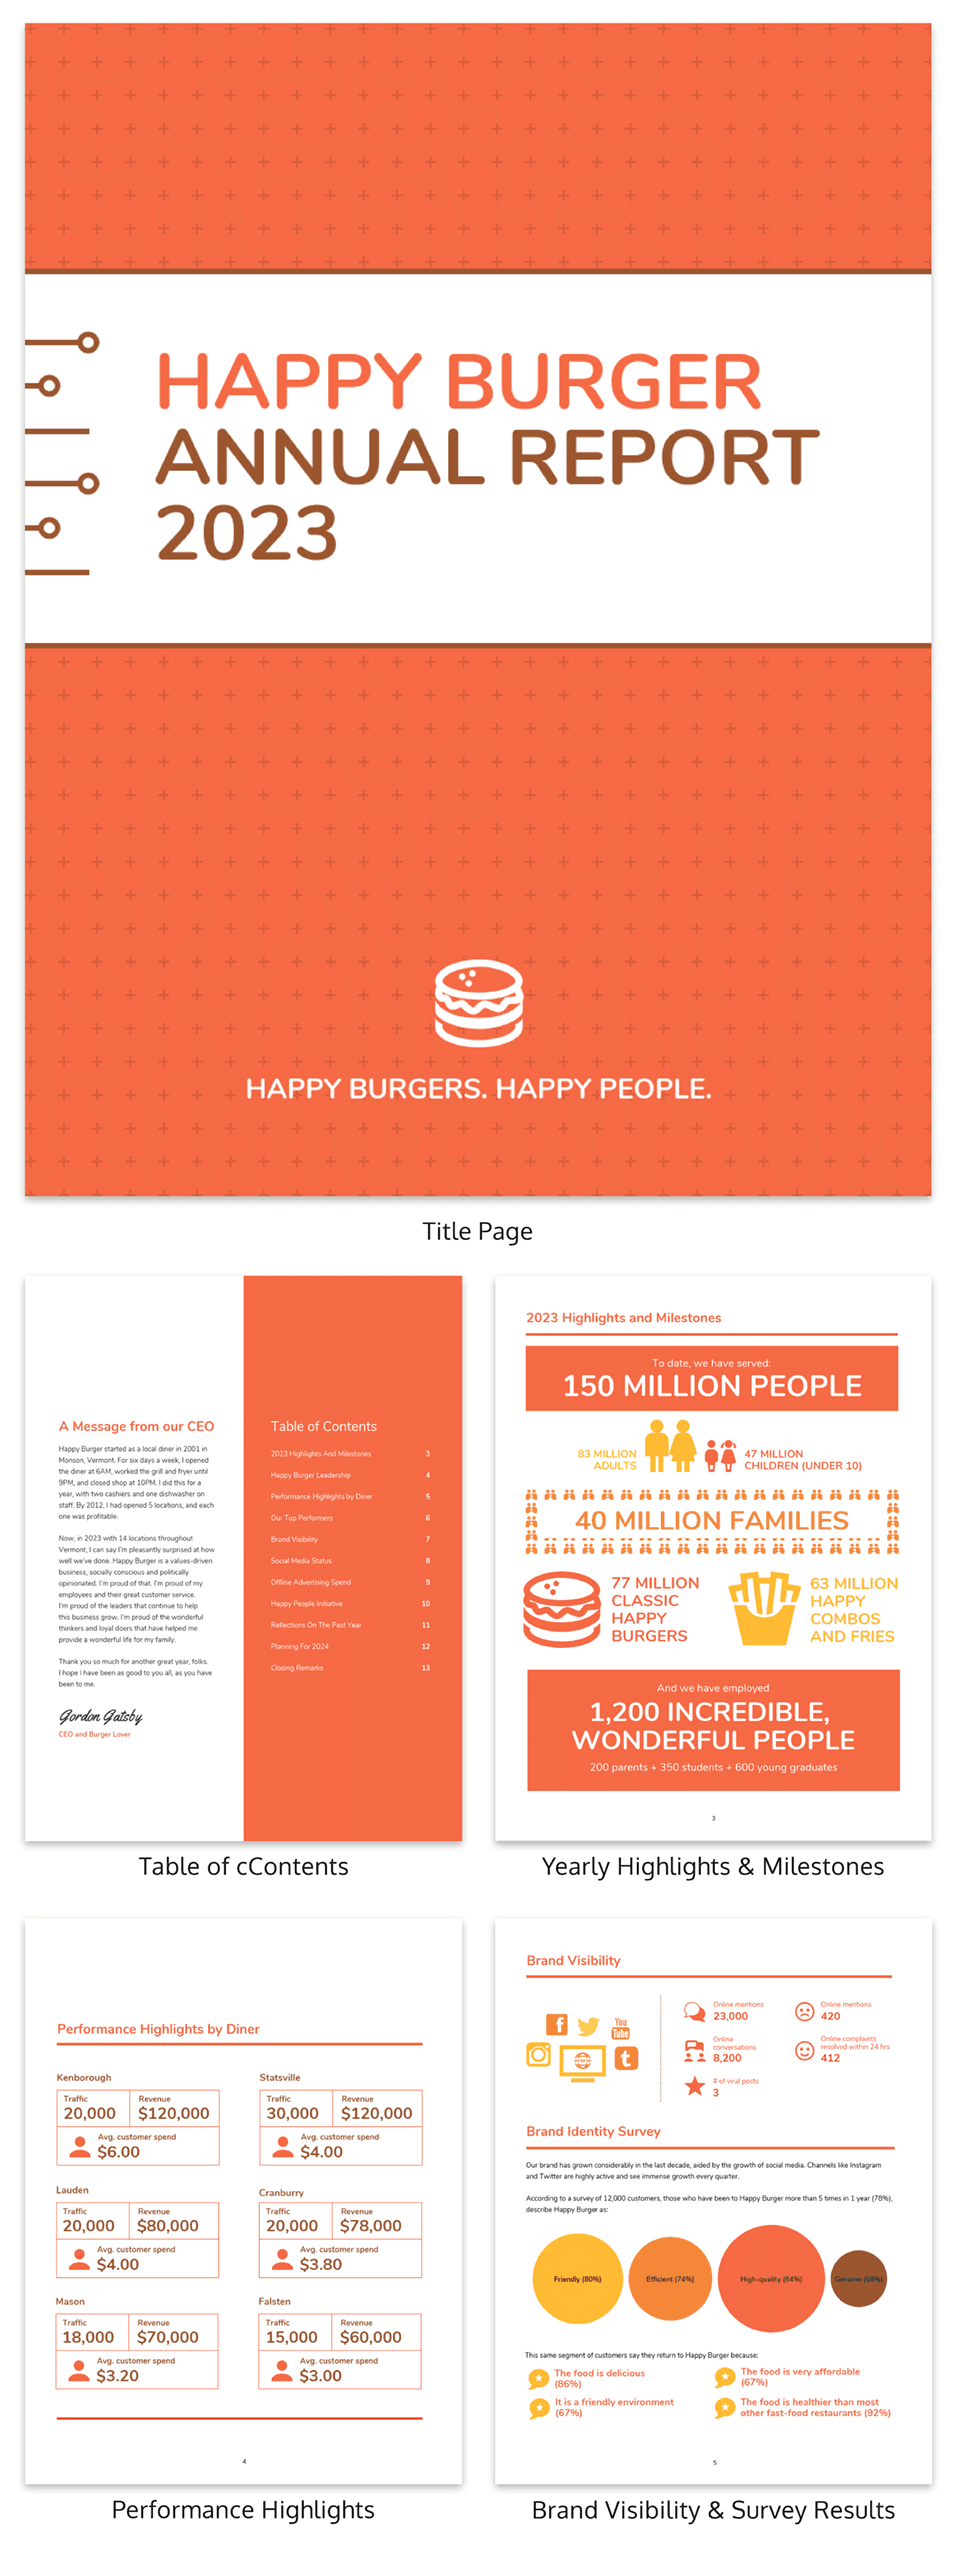 55+ Annual Report Design Templates & Inspirational Examples Within Summary Annual Report Template